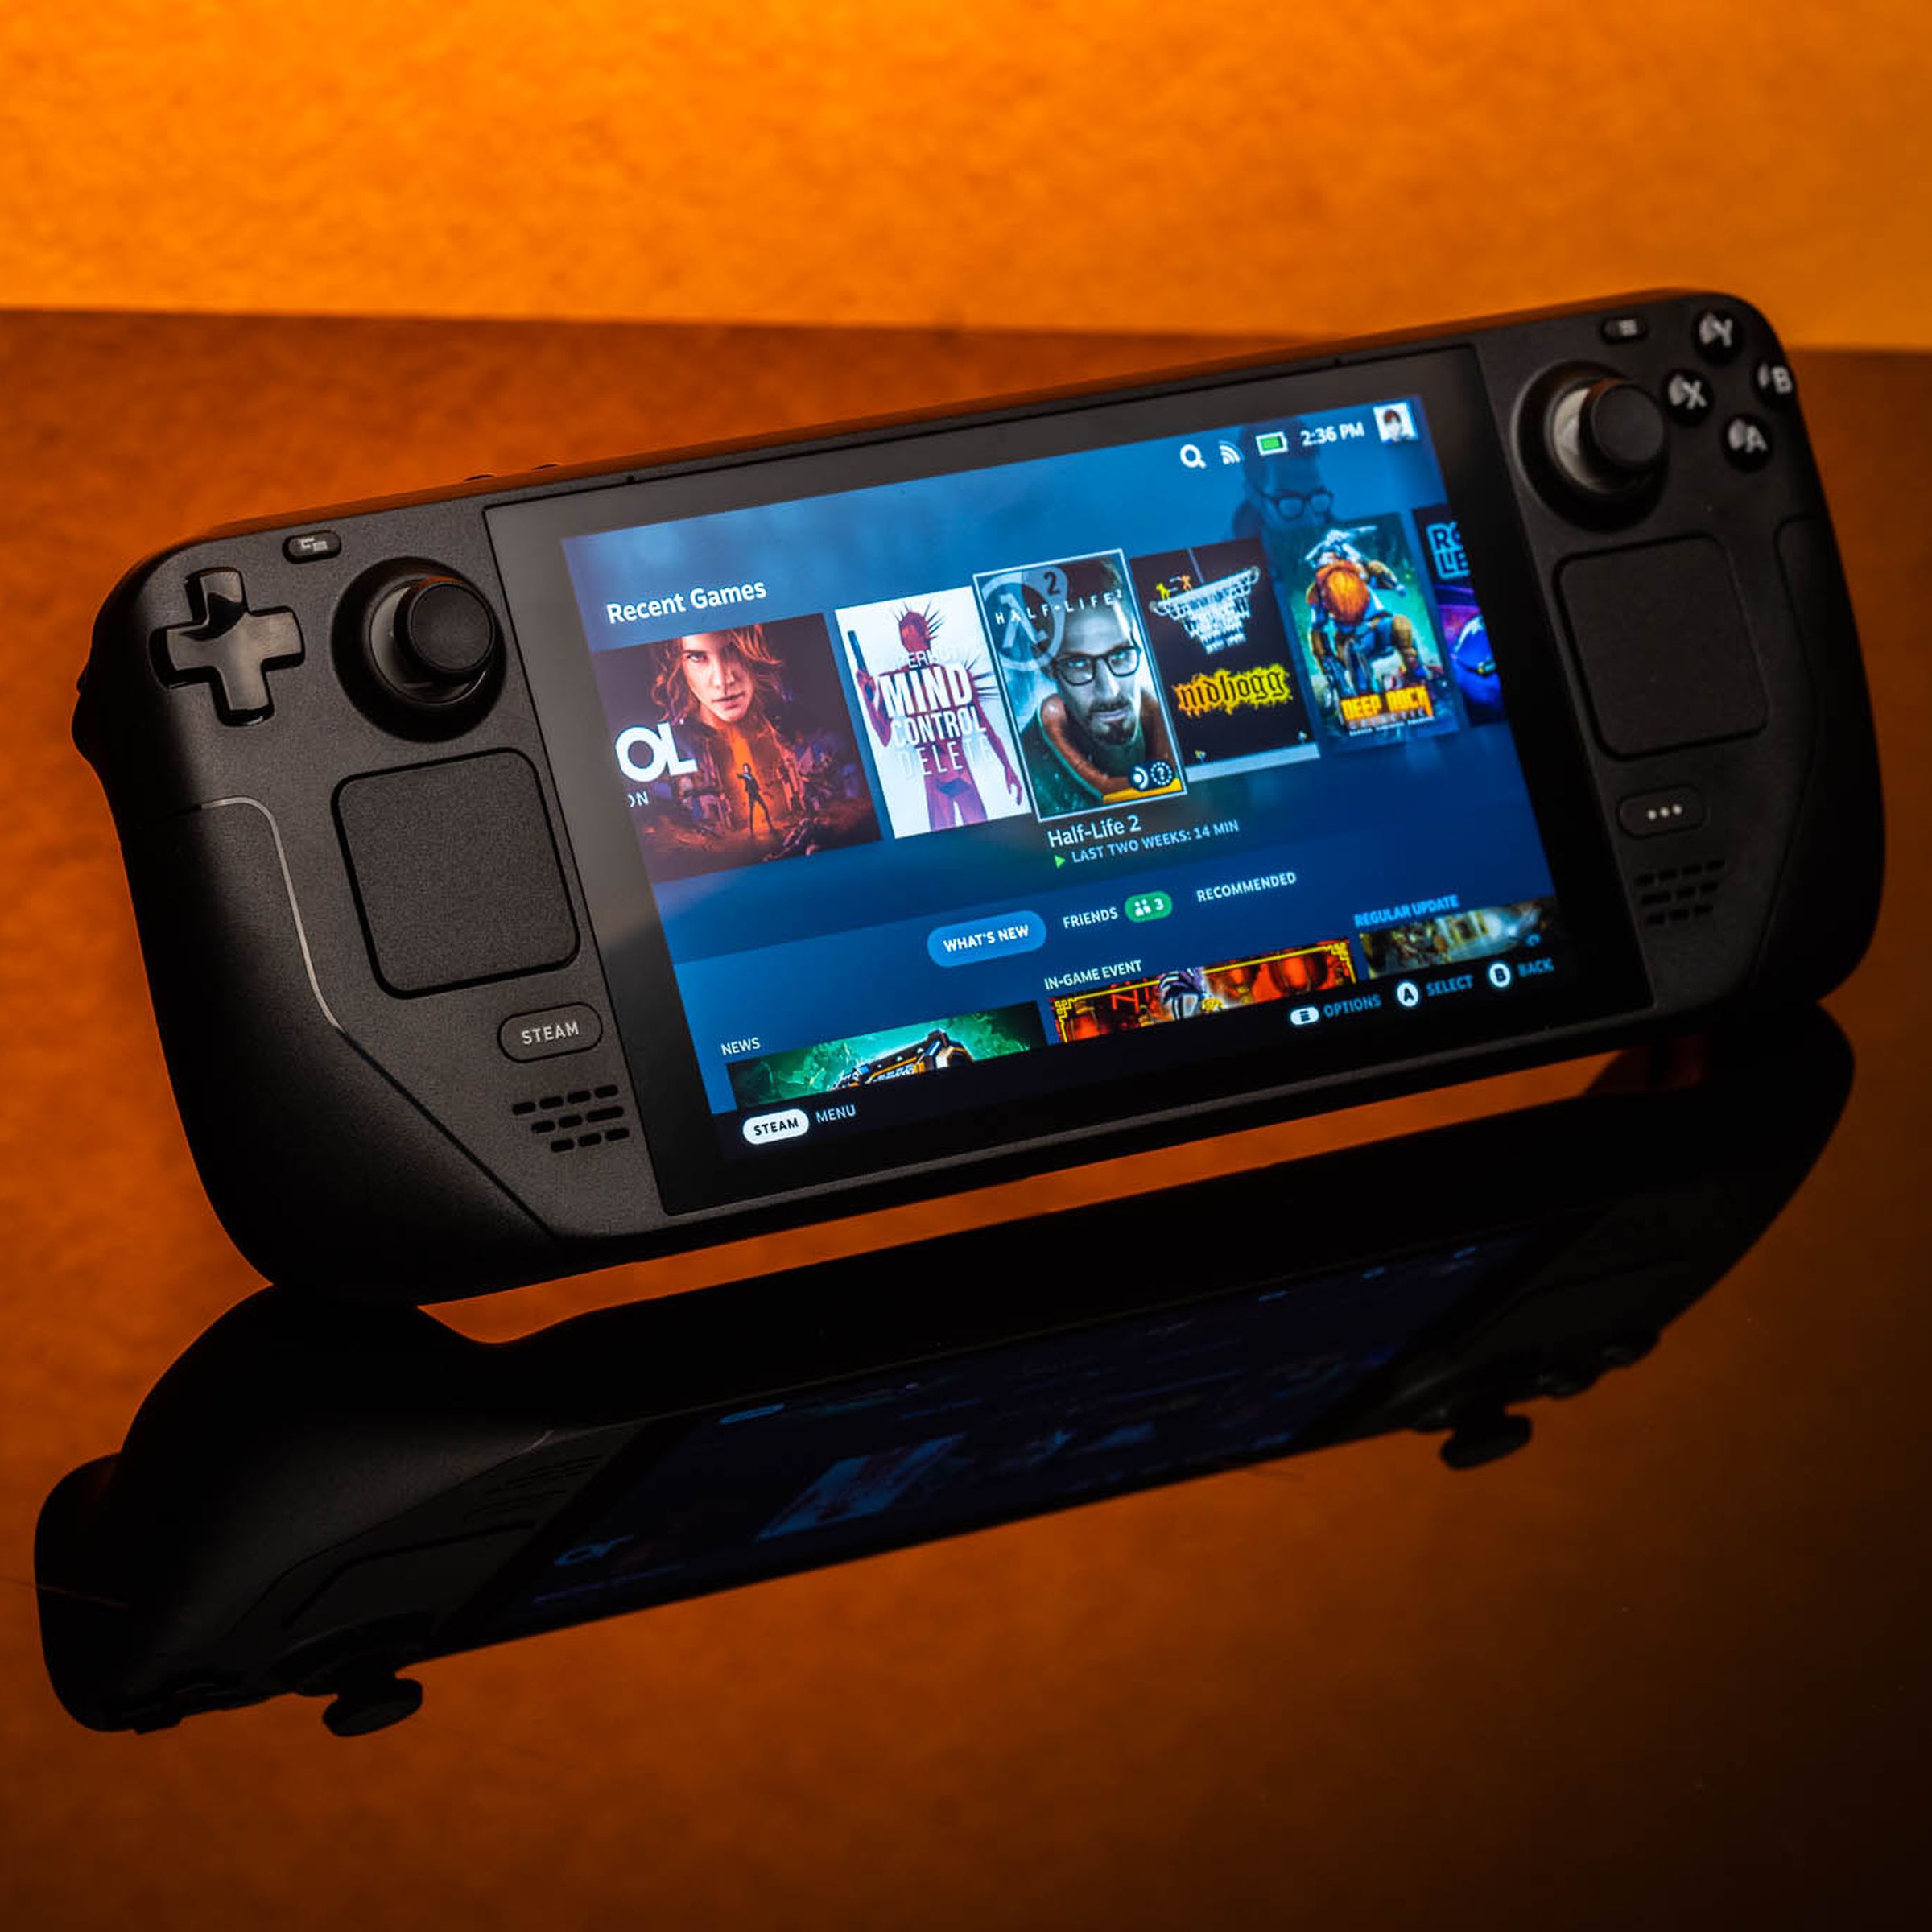 The Valve Steam Deck gaming handheld sits on a reflective table, with an orange background.